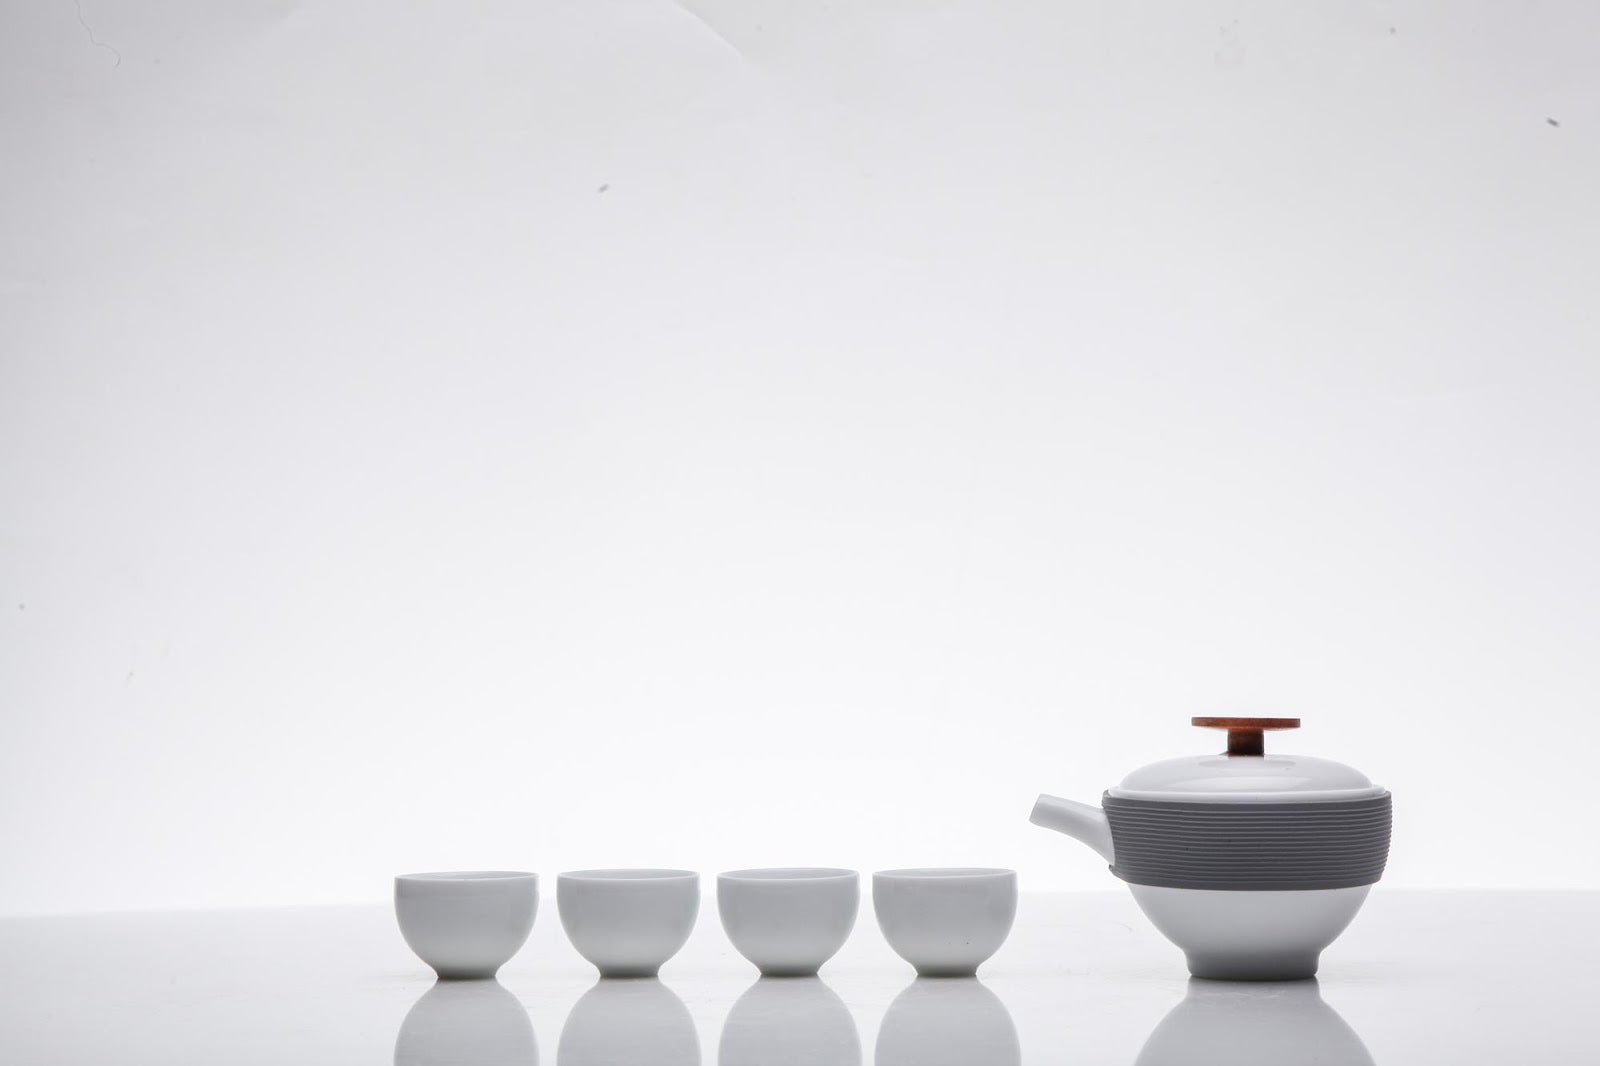 Jingdezhen tea set with teapot and four cups bright white background